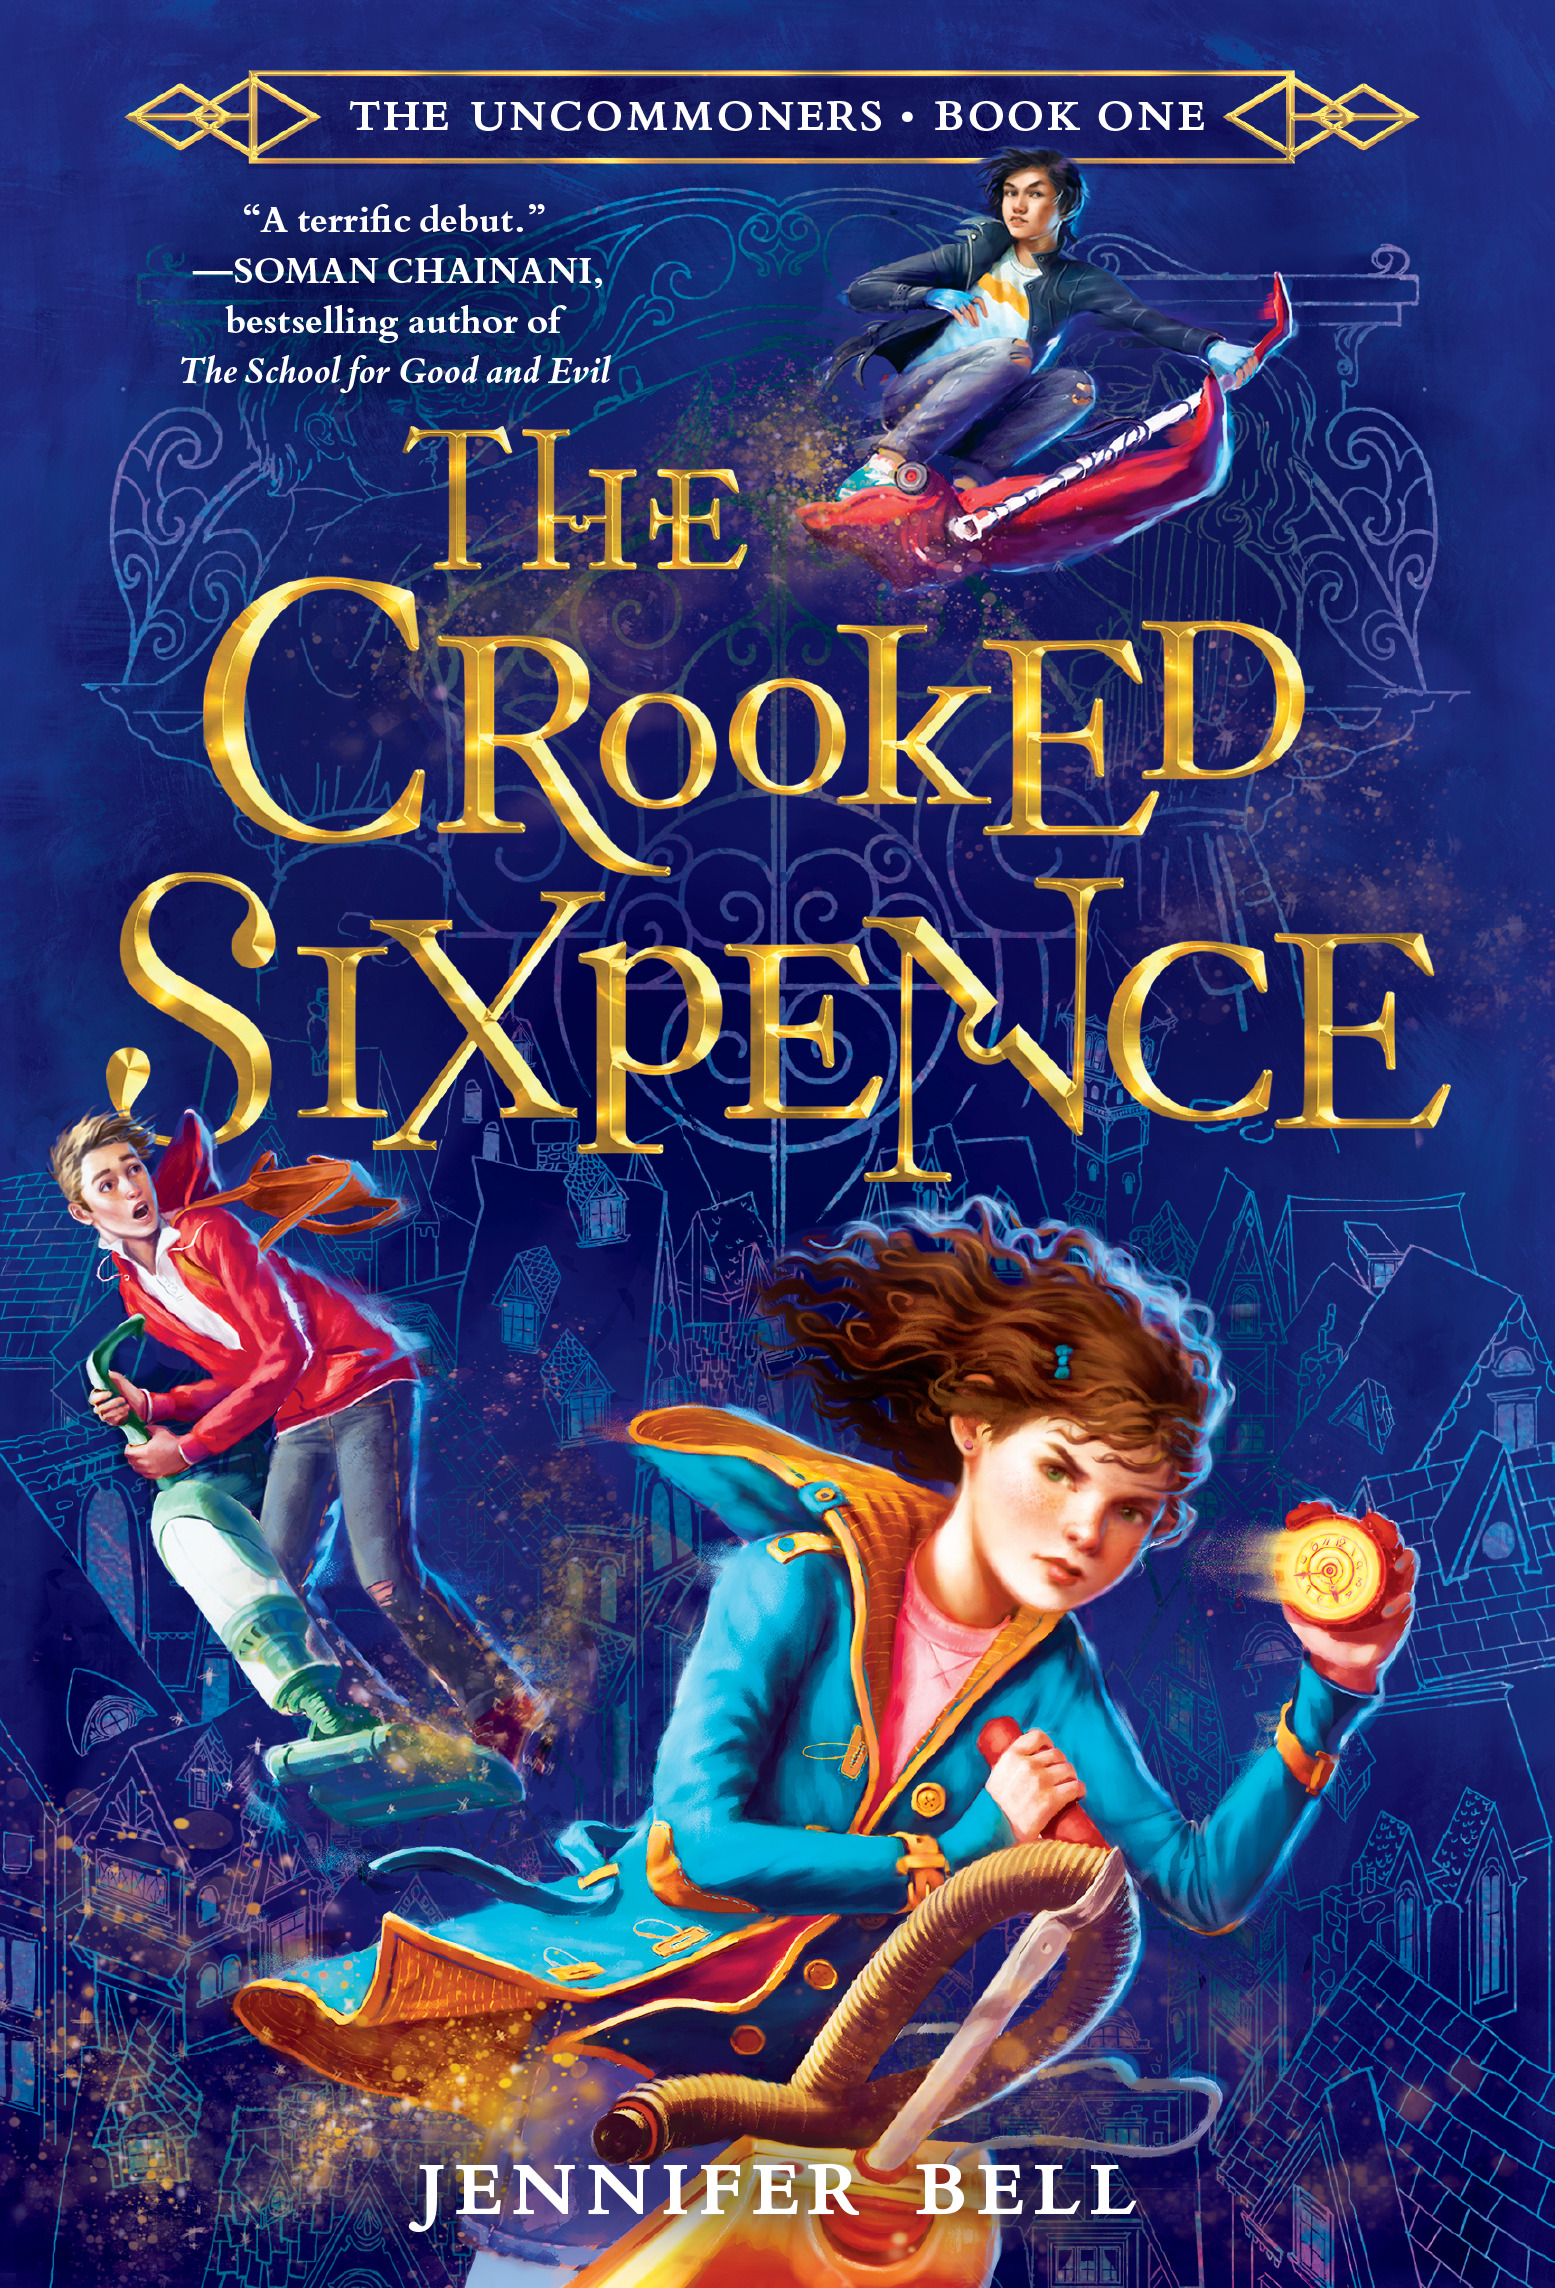 The Uncommoners #1: The Crooked Sixpence | Bell, Jennifer